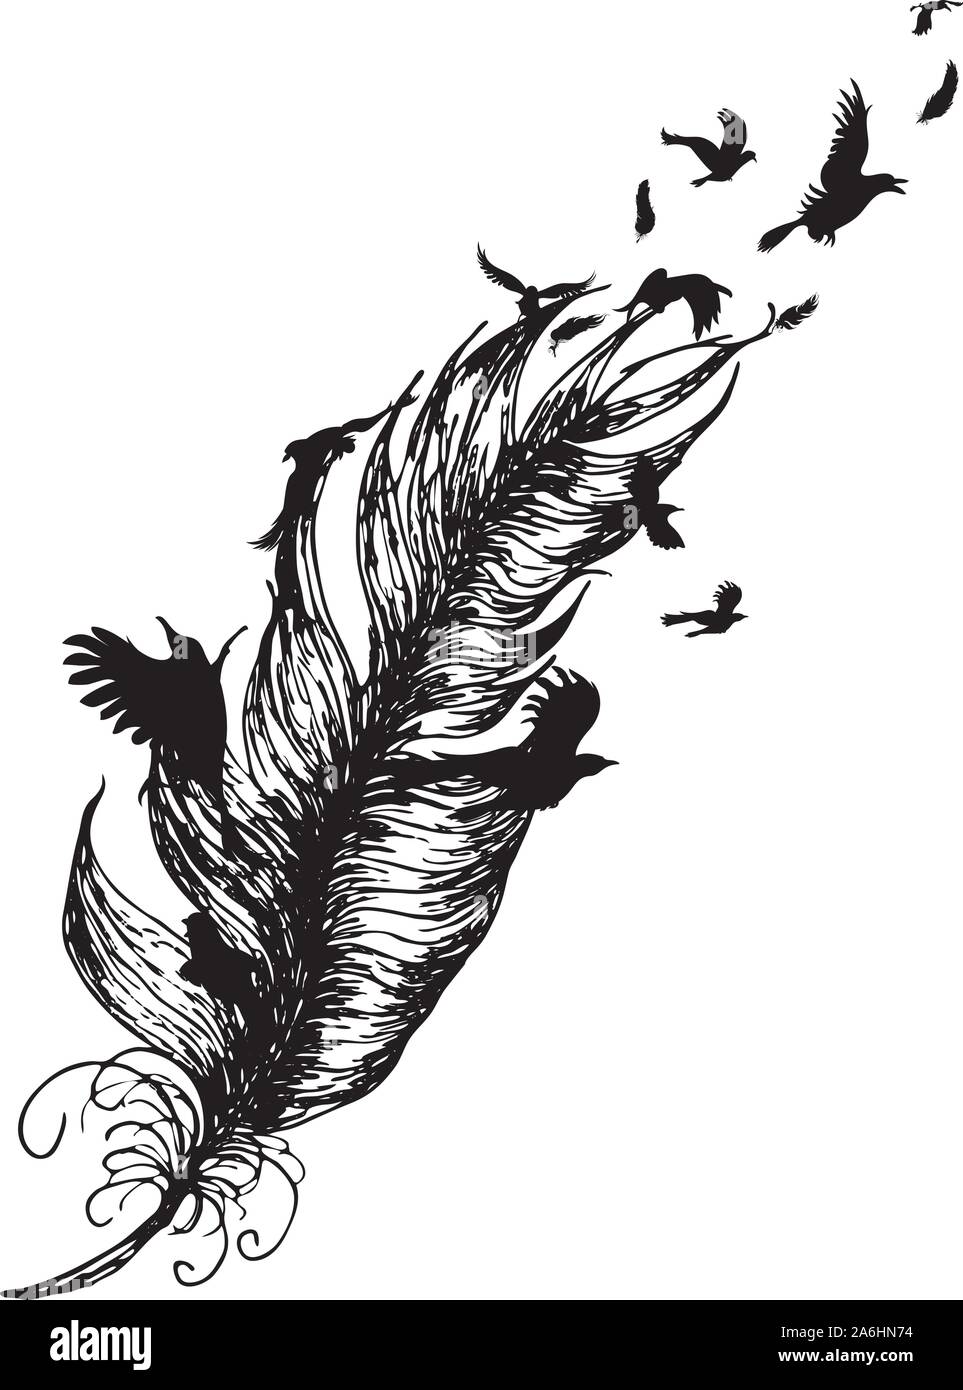 flying-birds-and-feather-silhouette-tattoo-design-in-black-and-white-stock-vector-image-art-alamy